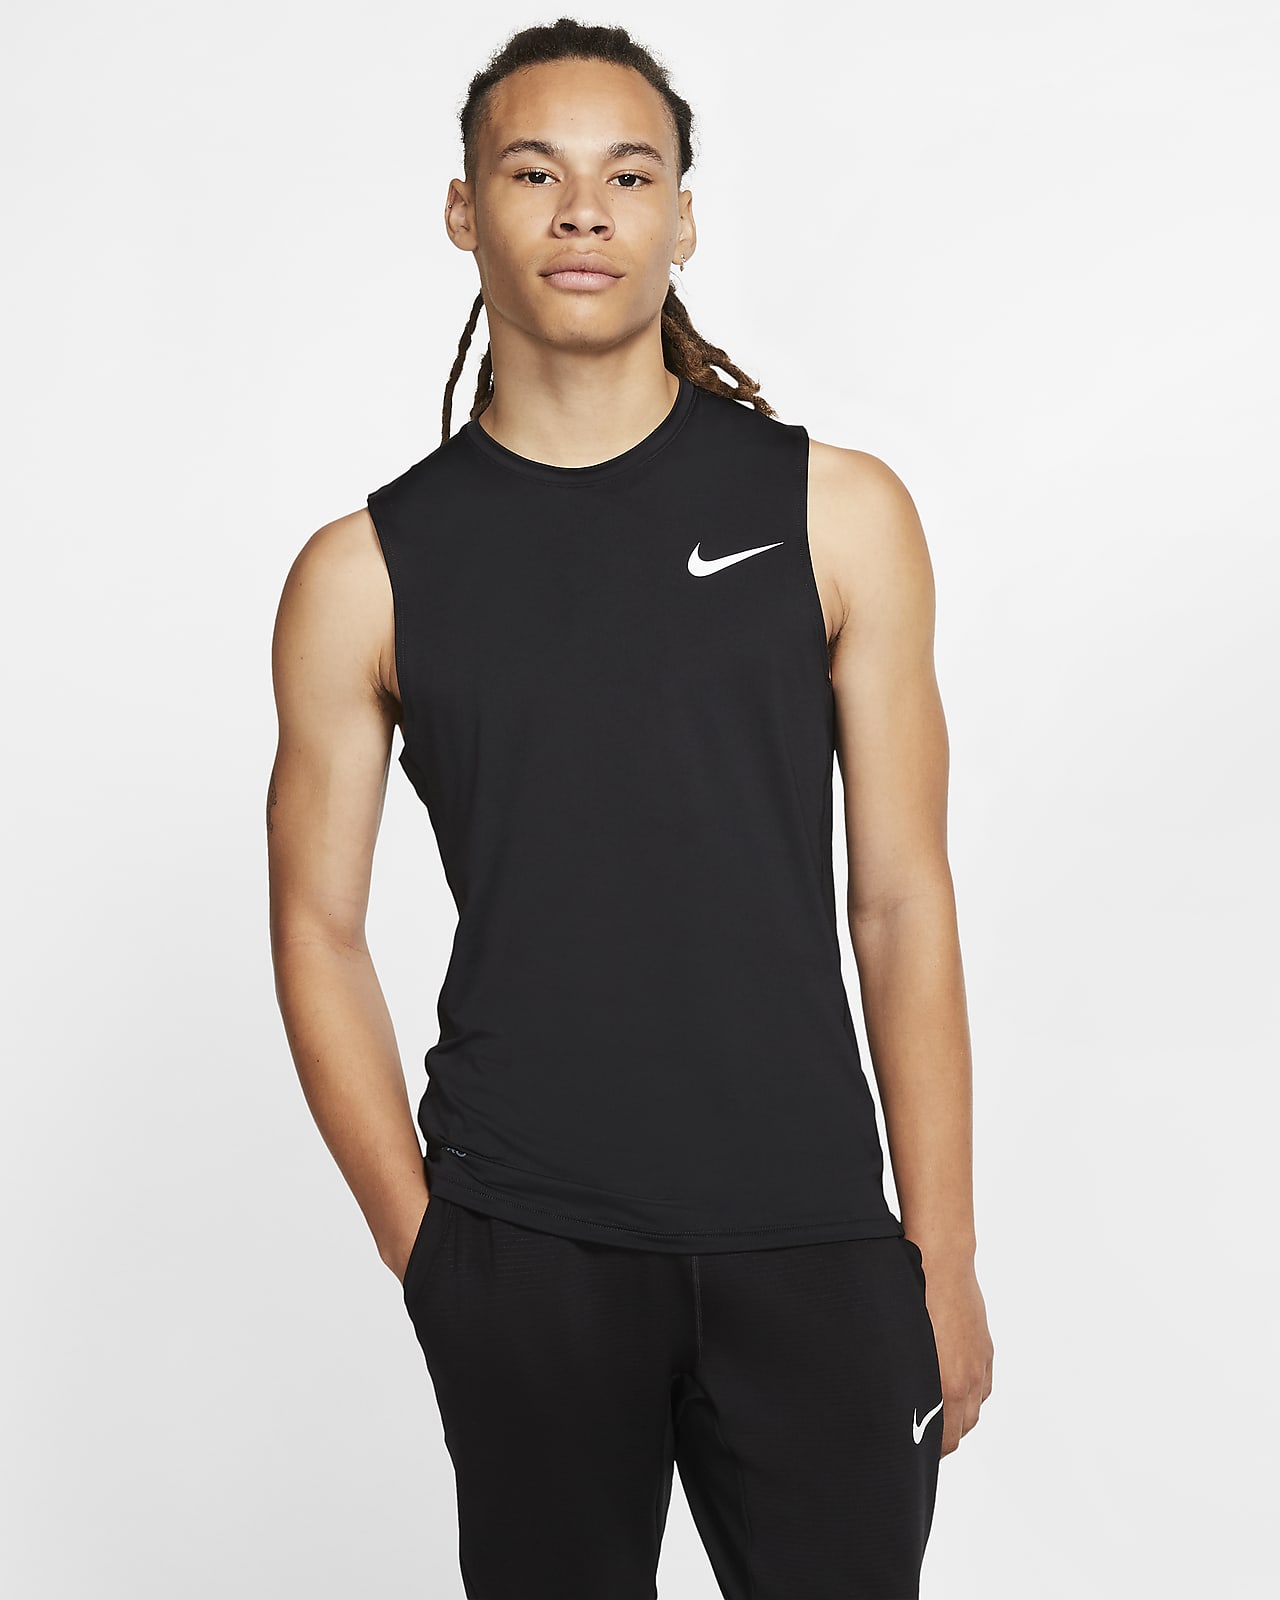 6 Day Mens Workout Tank Tops Nike for Fat Body